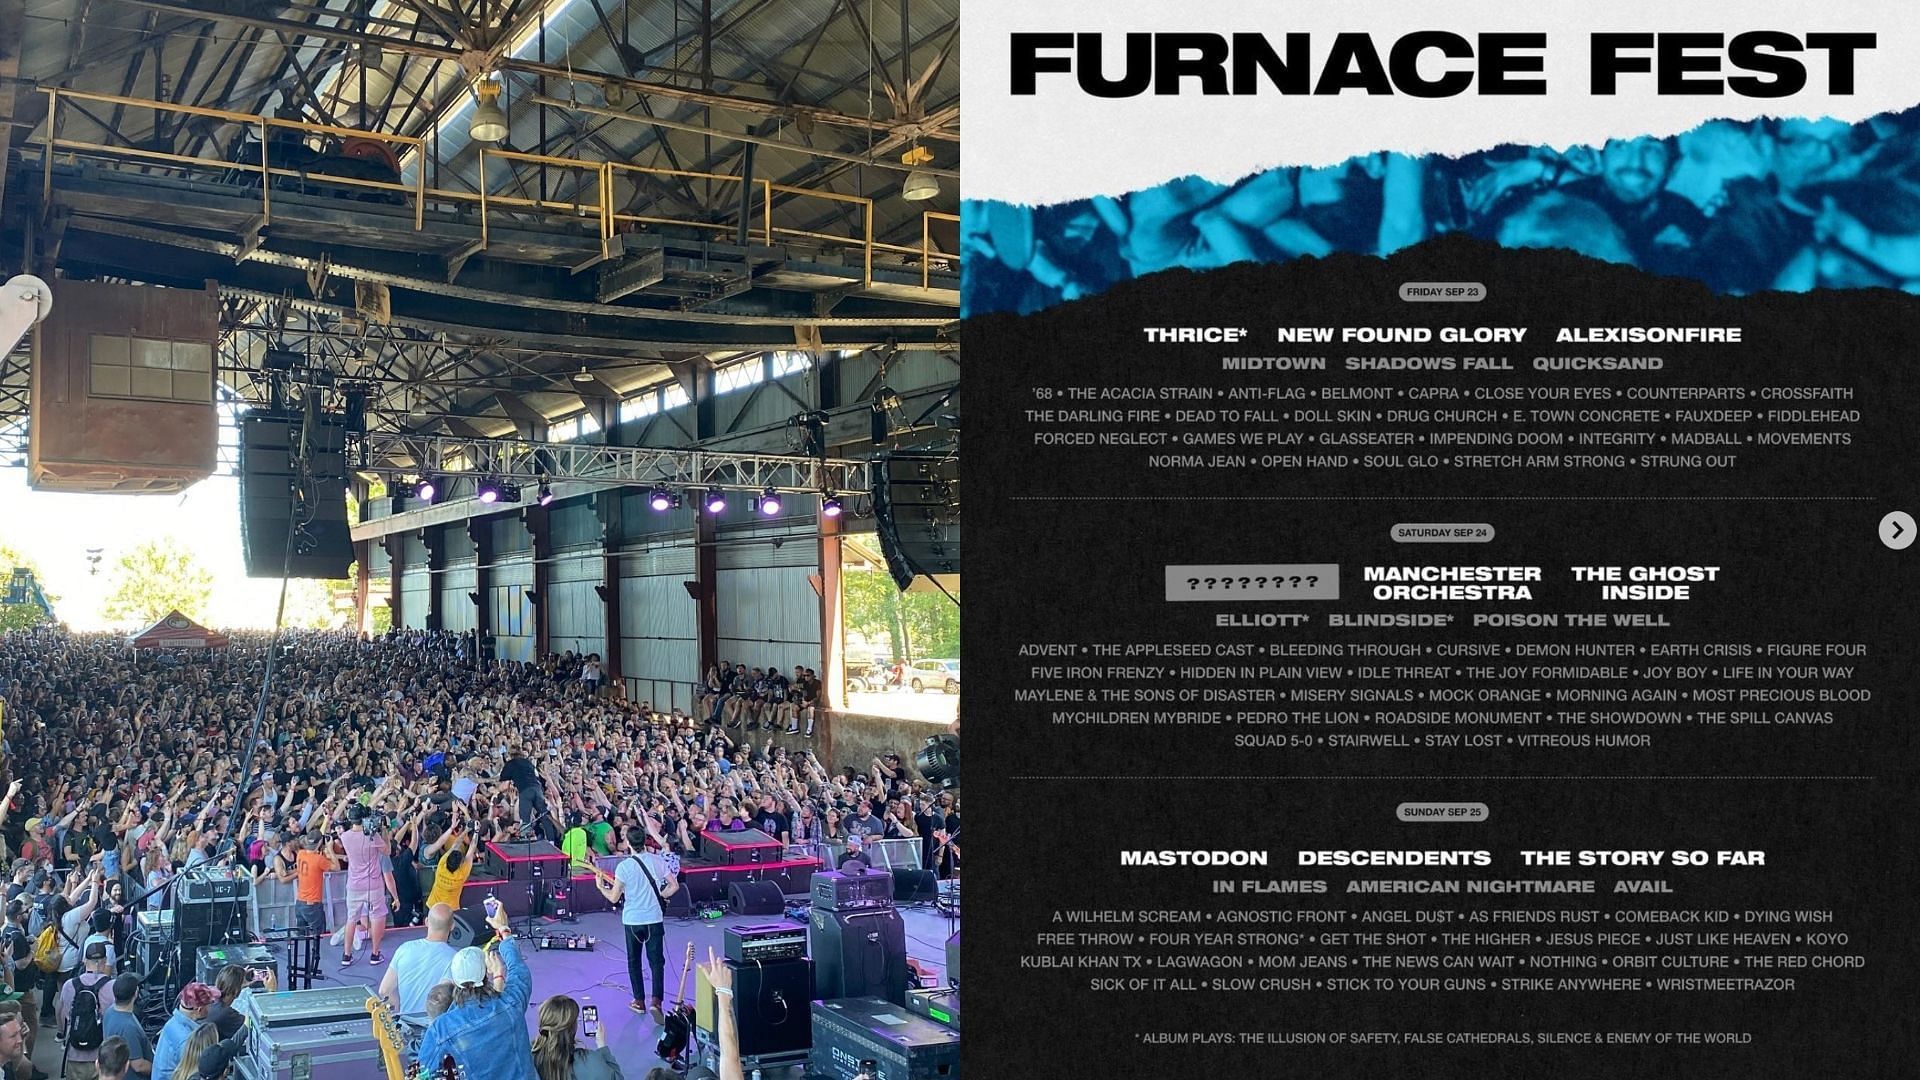 Furnace Fest has announced the second wave of its lineup slated for September 23 to 25 in Birmingham. (Images via Instagram / Furnace Fest)